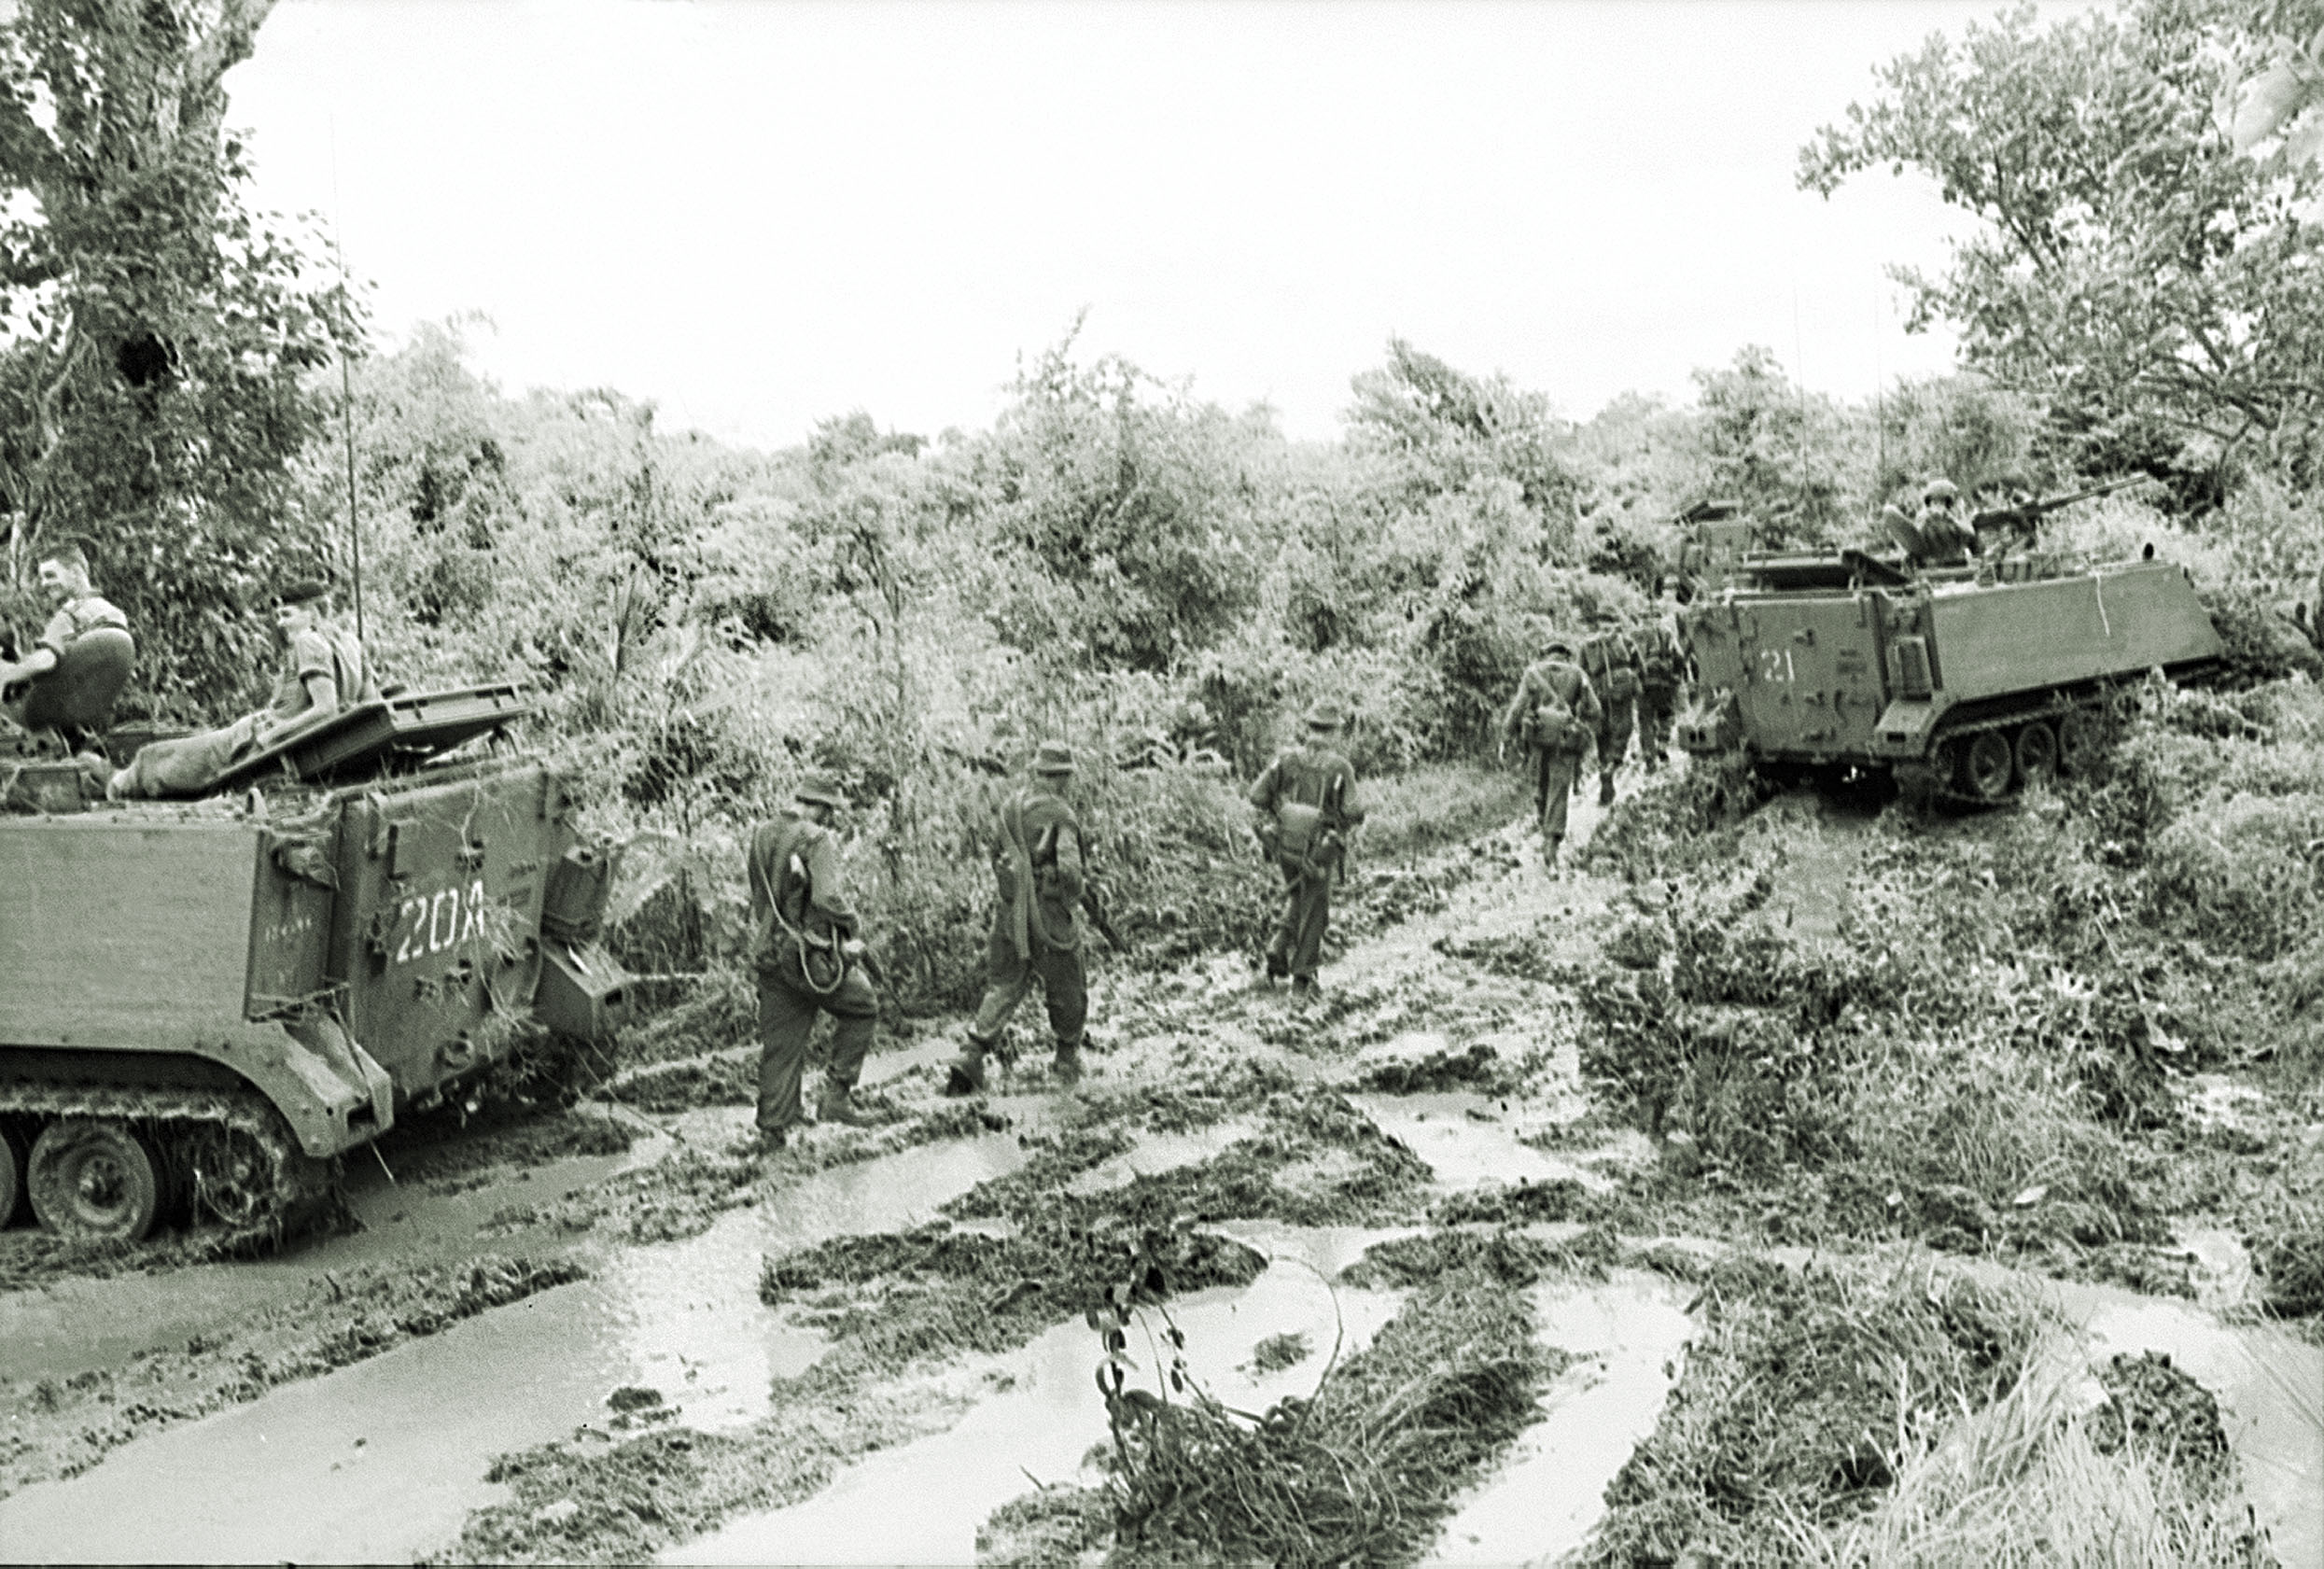 Soldiers of the 6th Battalion pursue a fleeing Viet Cong force on Aug. 19, 1966, the day after the Long Tan battle, fought in heavy rain and thick mud that bogged down men and equipment. / Australian War Memorial